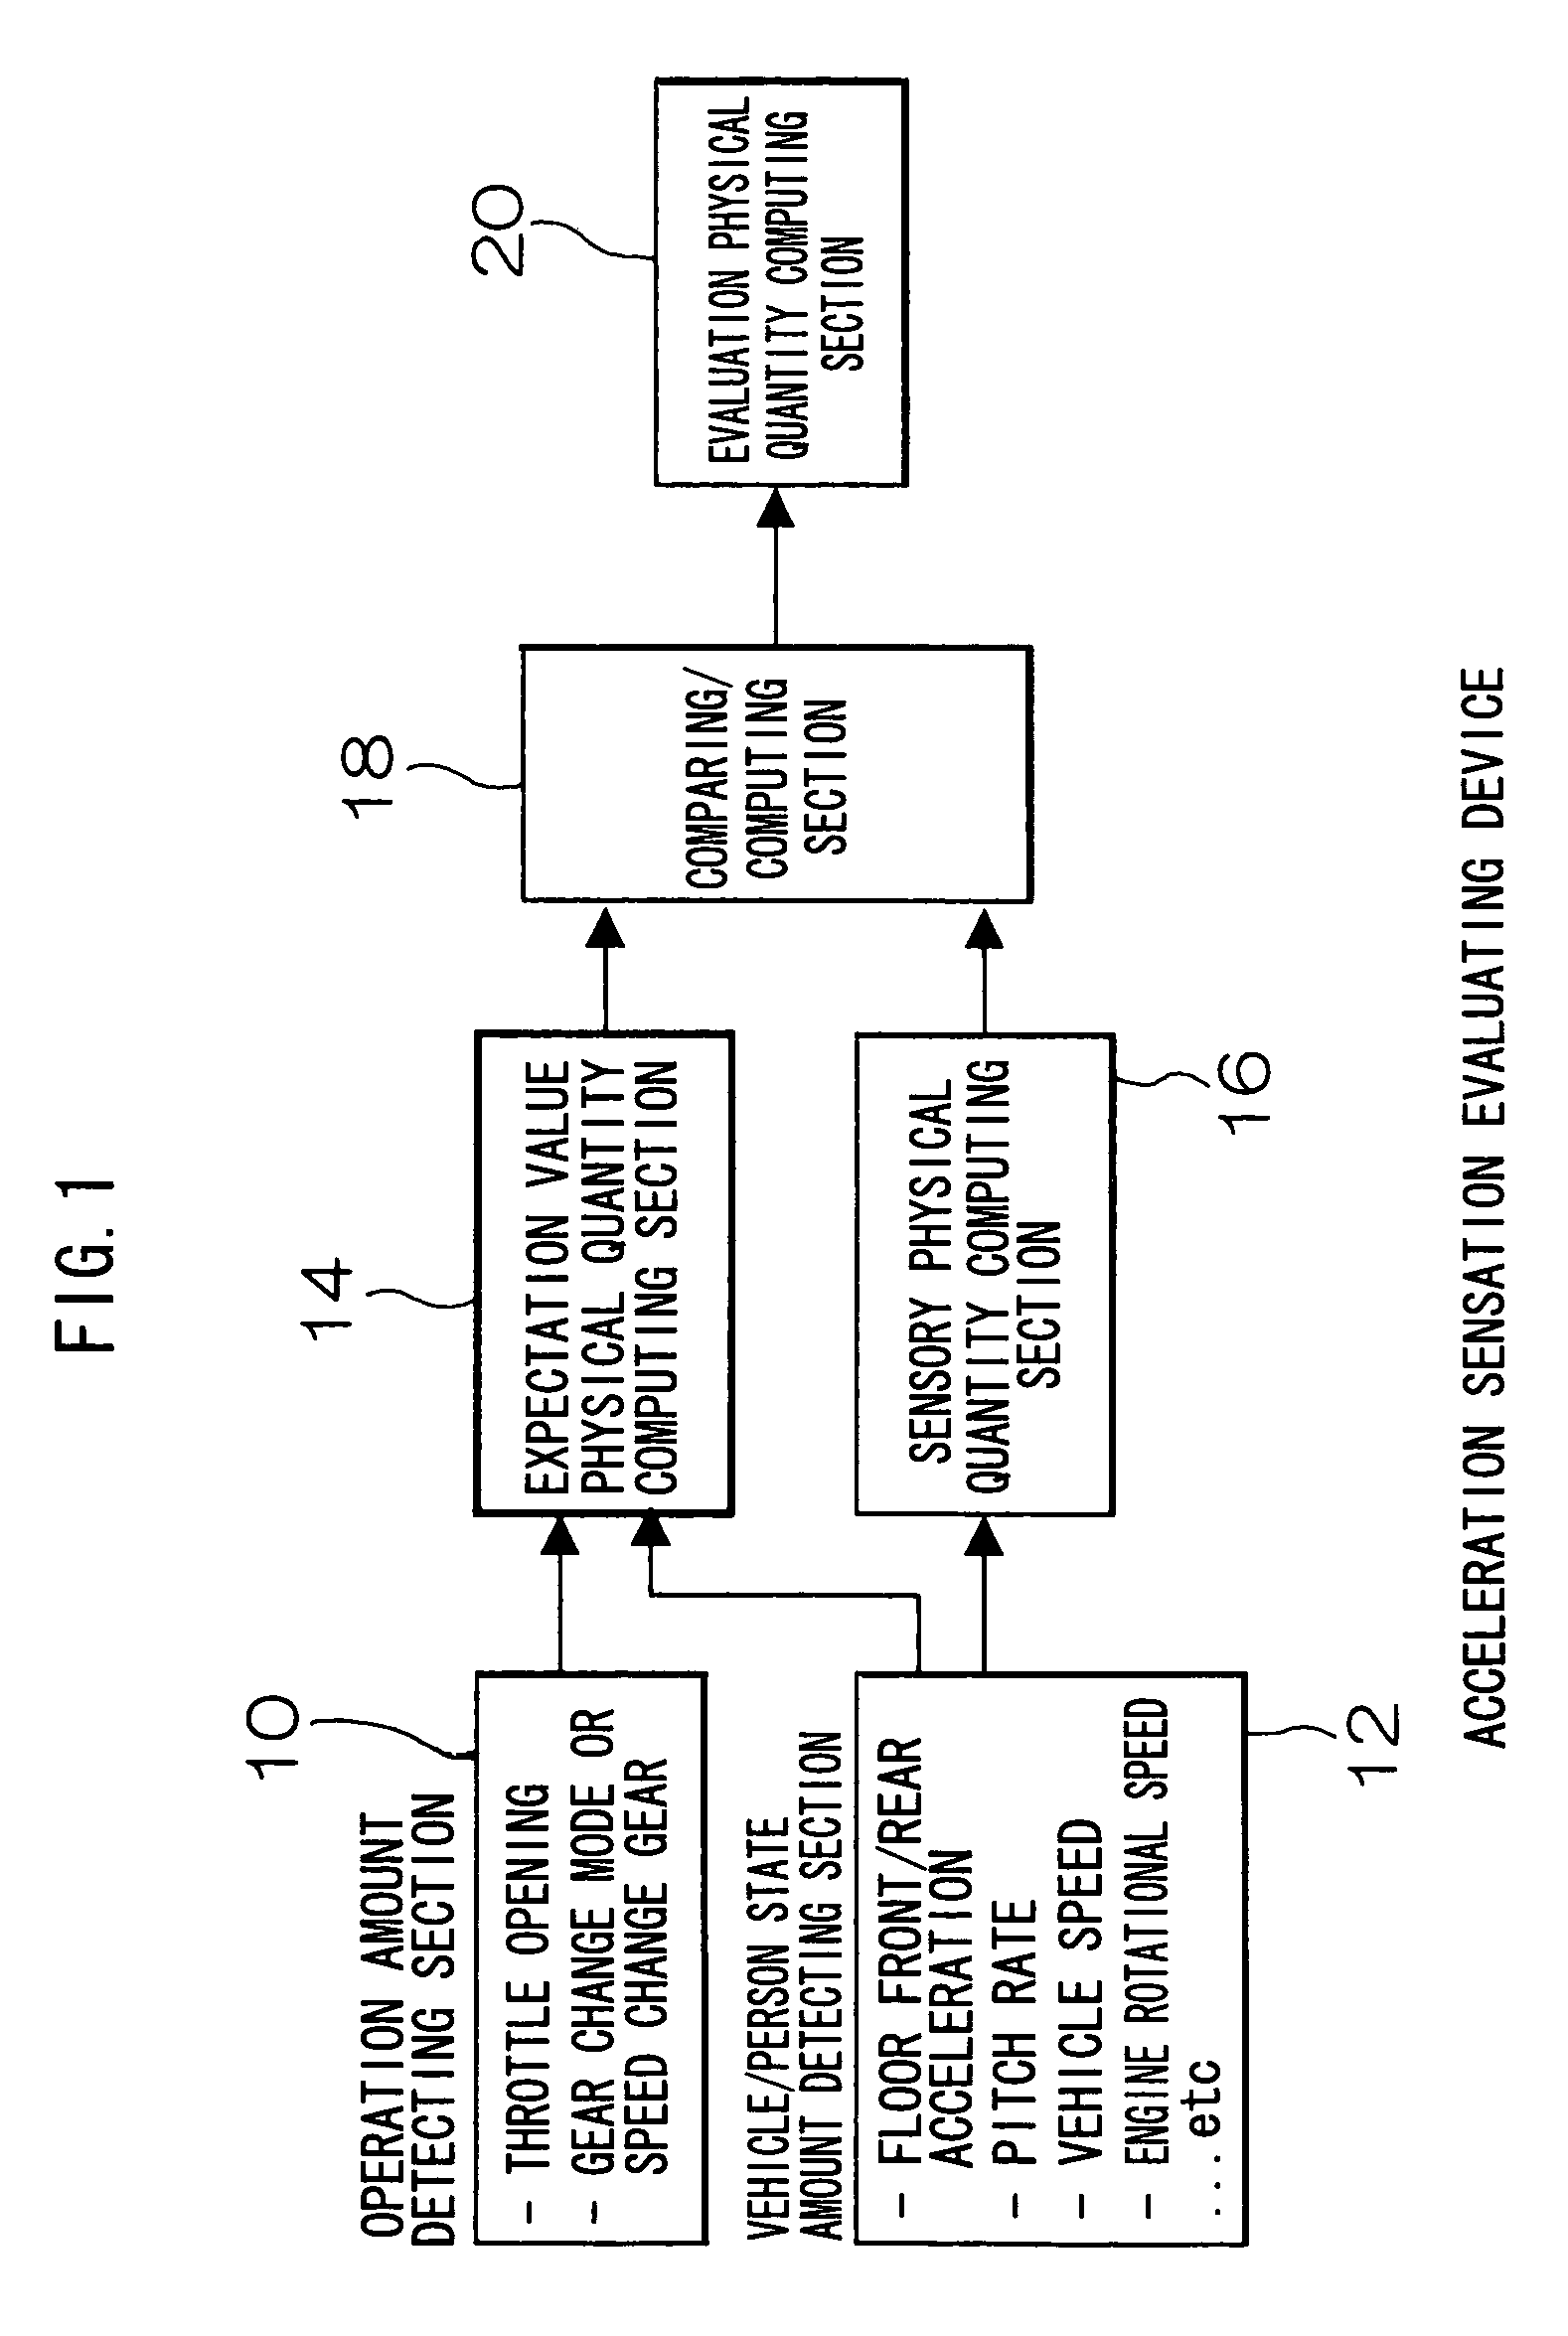 Acceleration Sensation Evaluating Device and Vehicle Controller